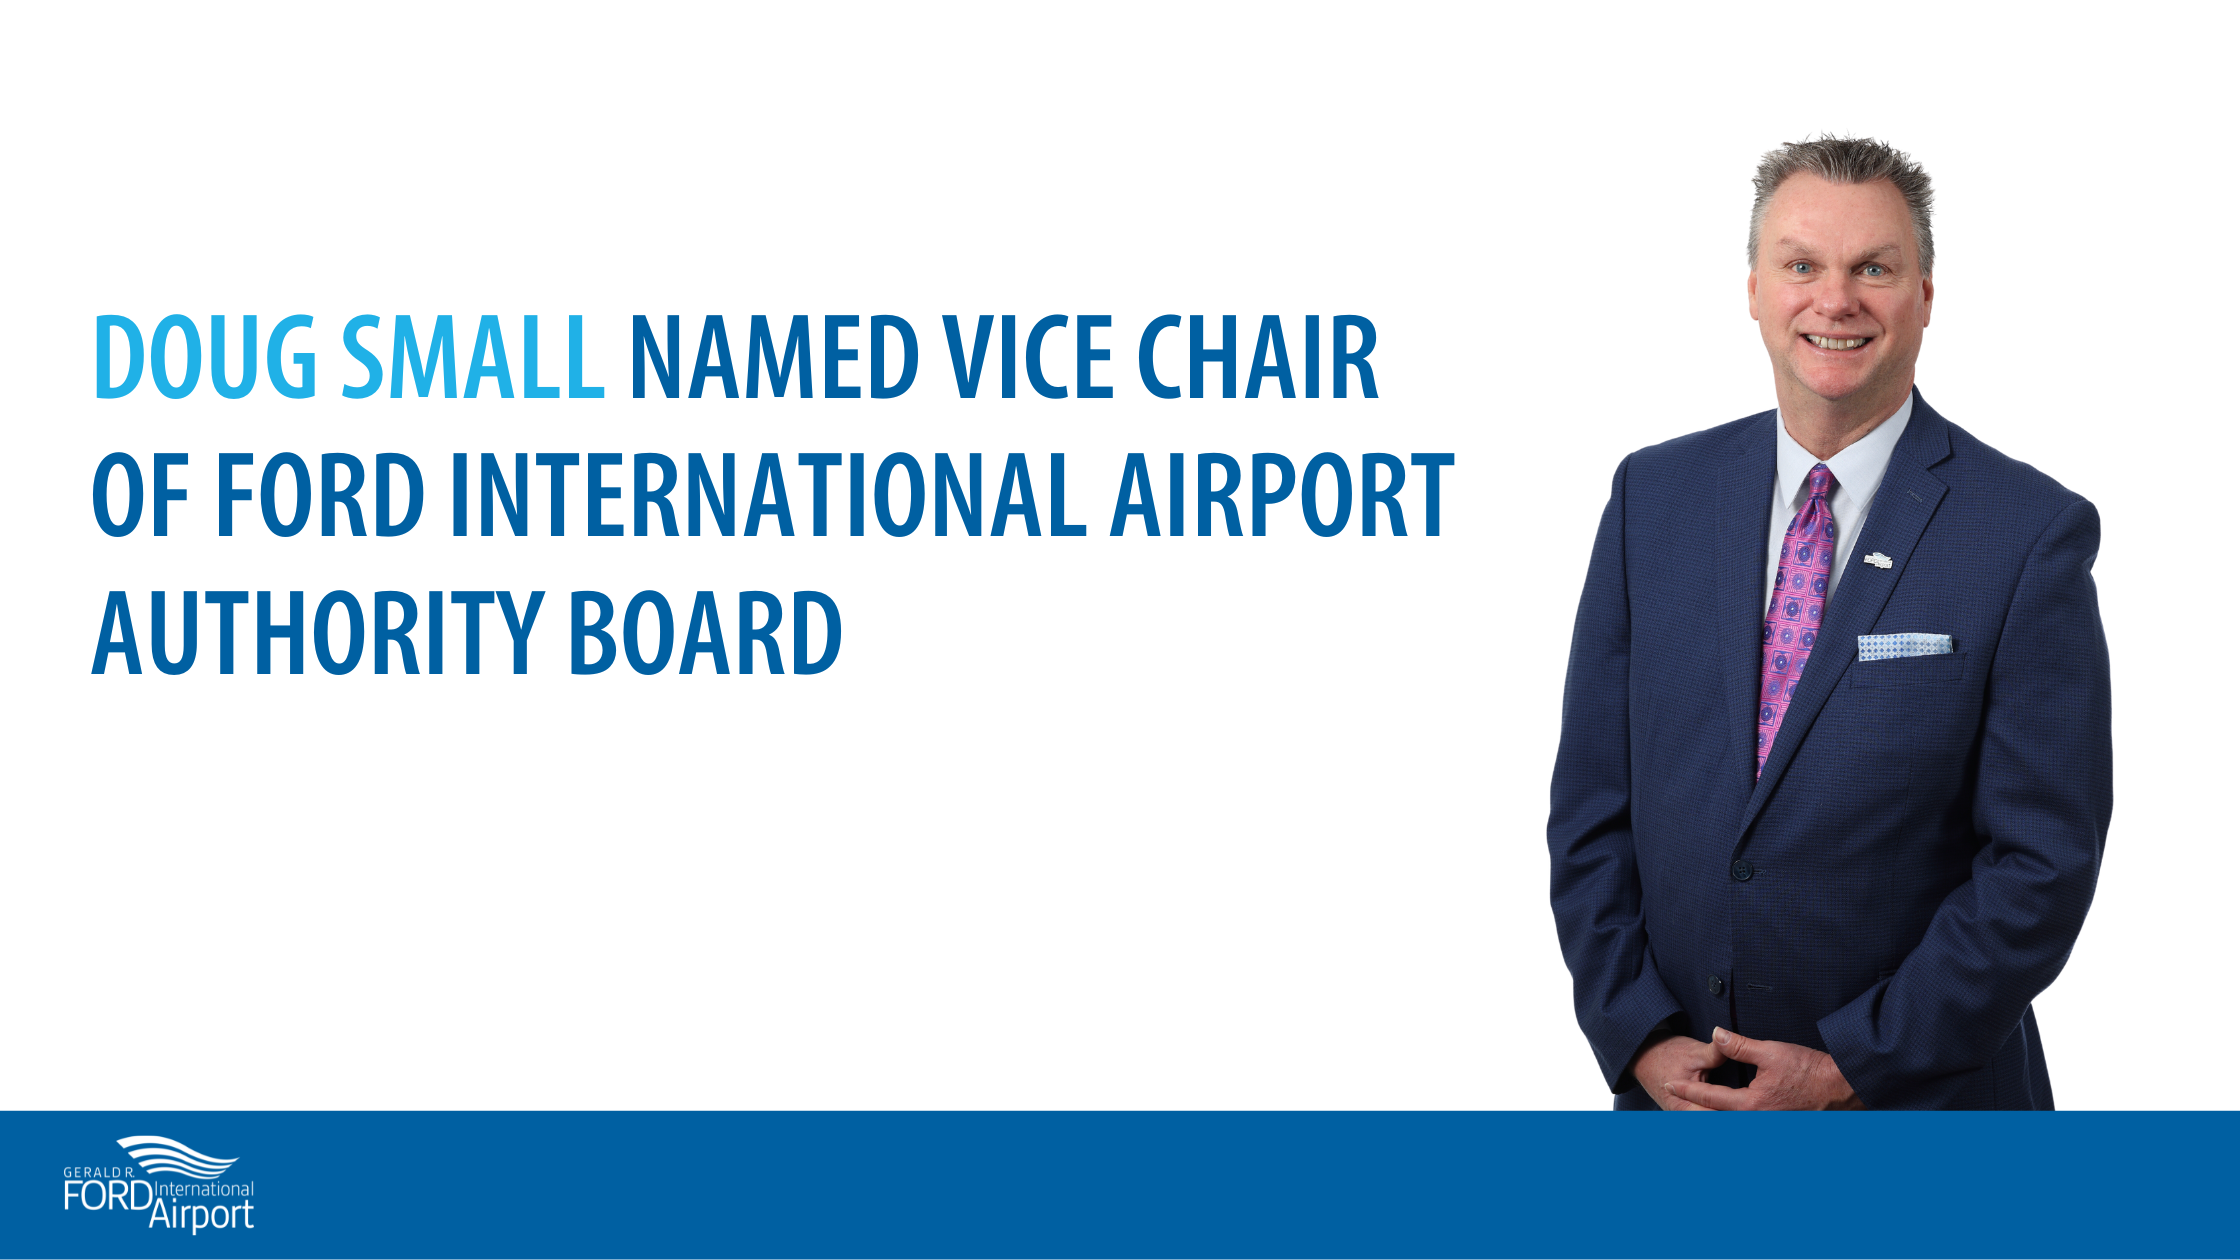 Doug Small Named Vice Chair of Ford International Airport Authority Board